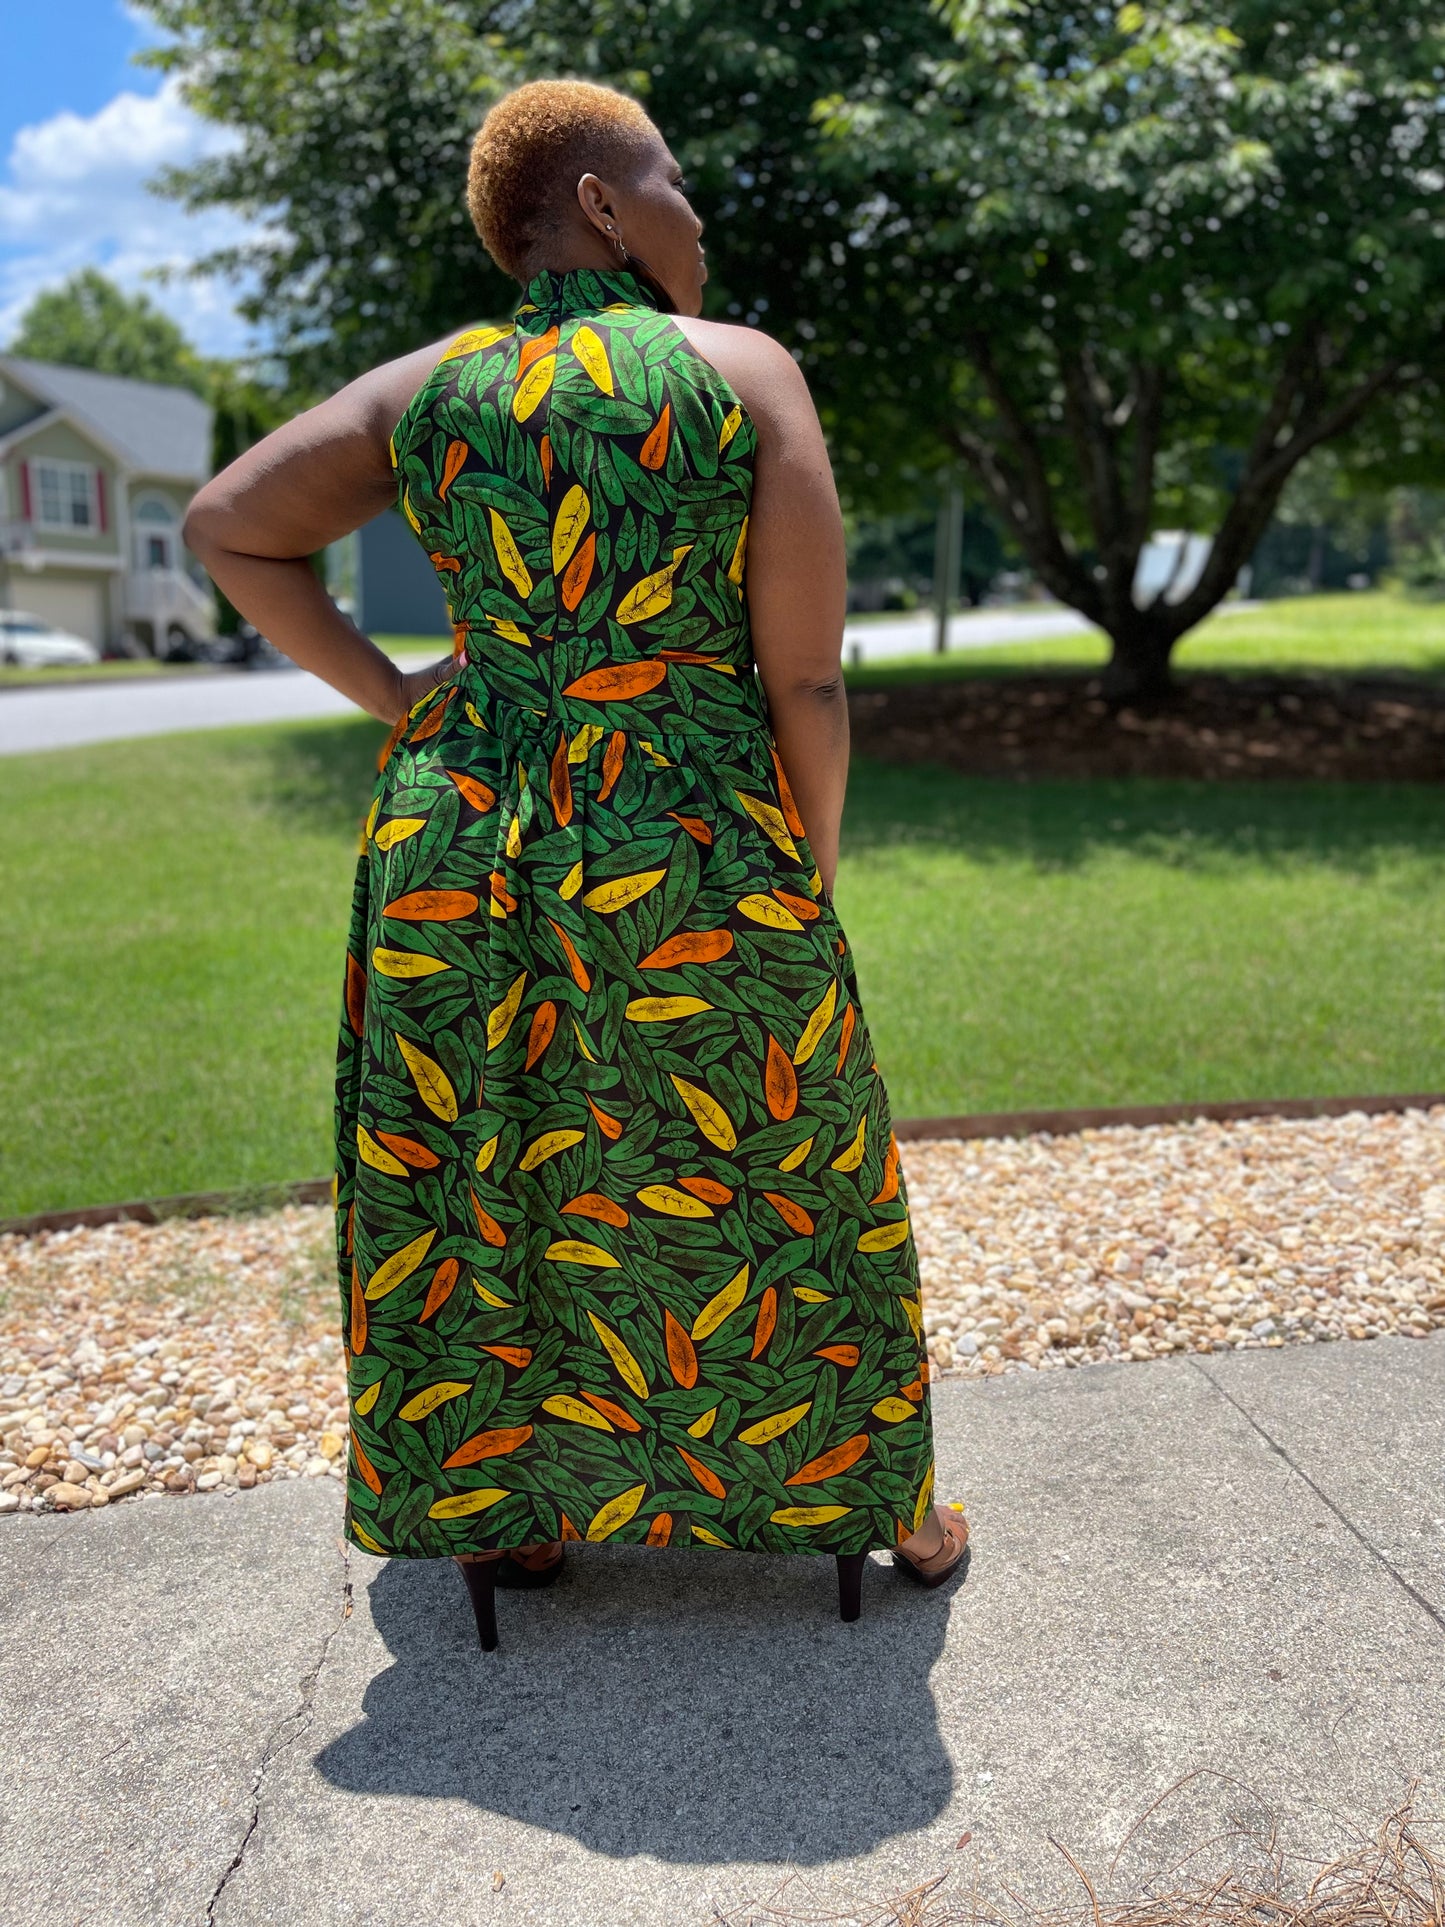 Hot Girl Summer -Thicc Madam Collection